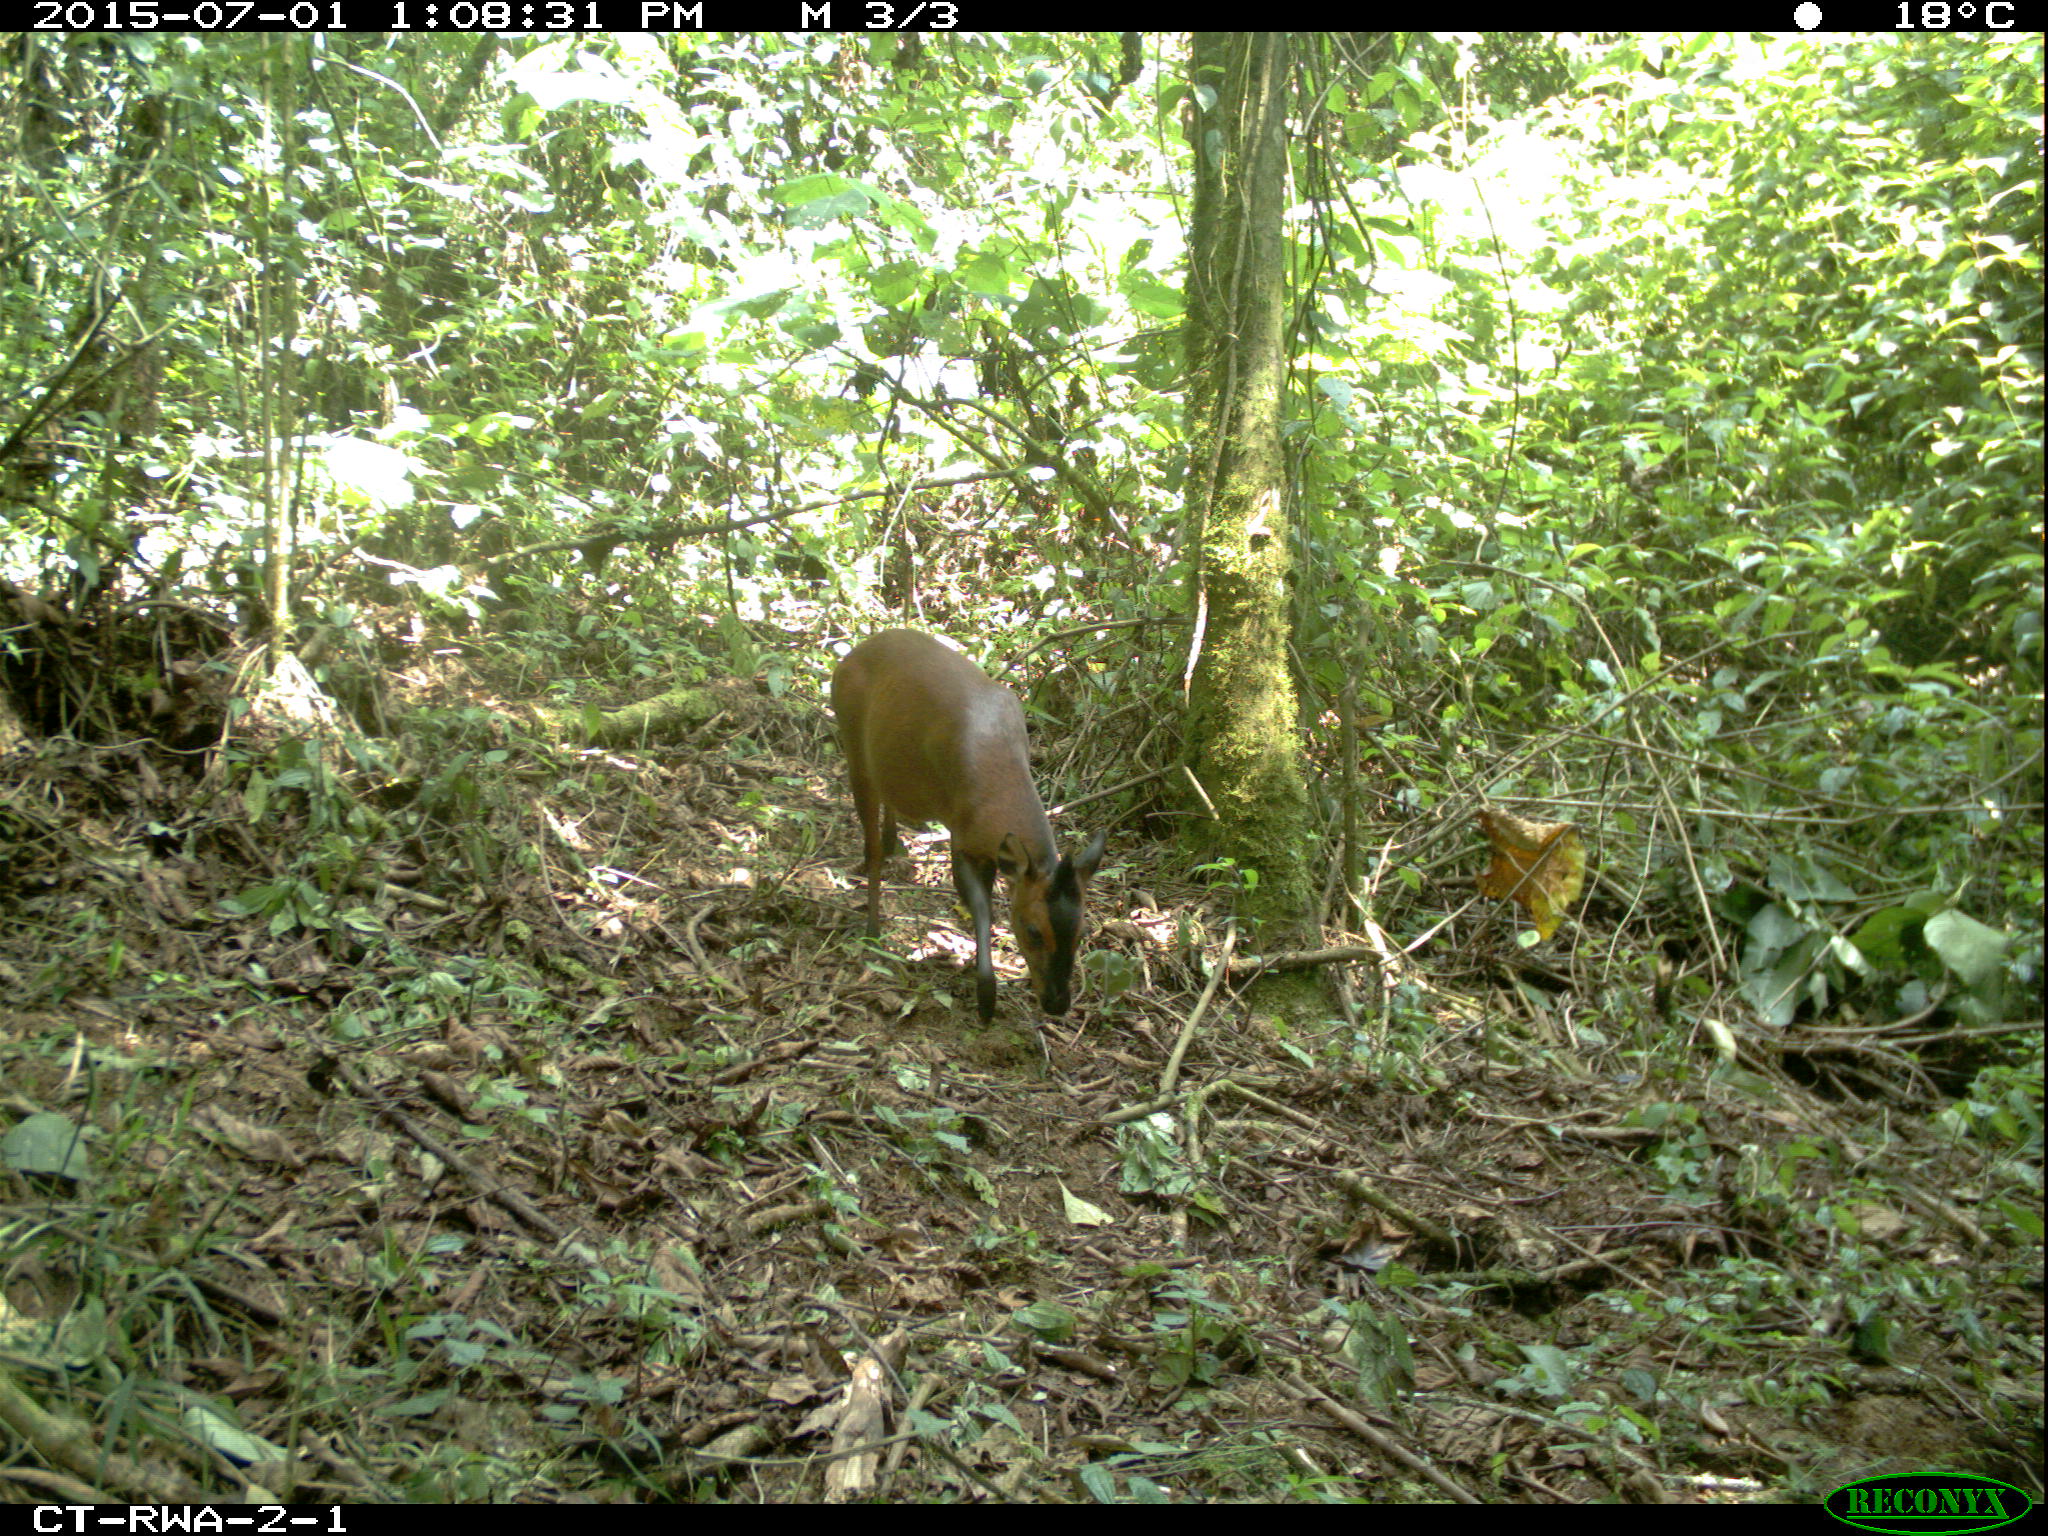 A small brown antelope with a black marking around its nose and forehead is photographed among green foliage. Information around the border of the photo show it was taken at 1:08 p.m. on July 1, 2015, when it was 18 degrees Celsius. The camera, made by Reconyx, is labeled CT-RWA-2-1.